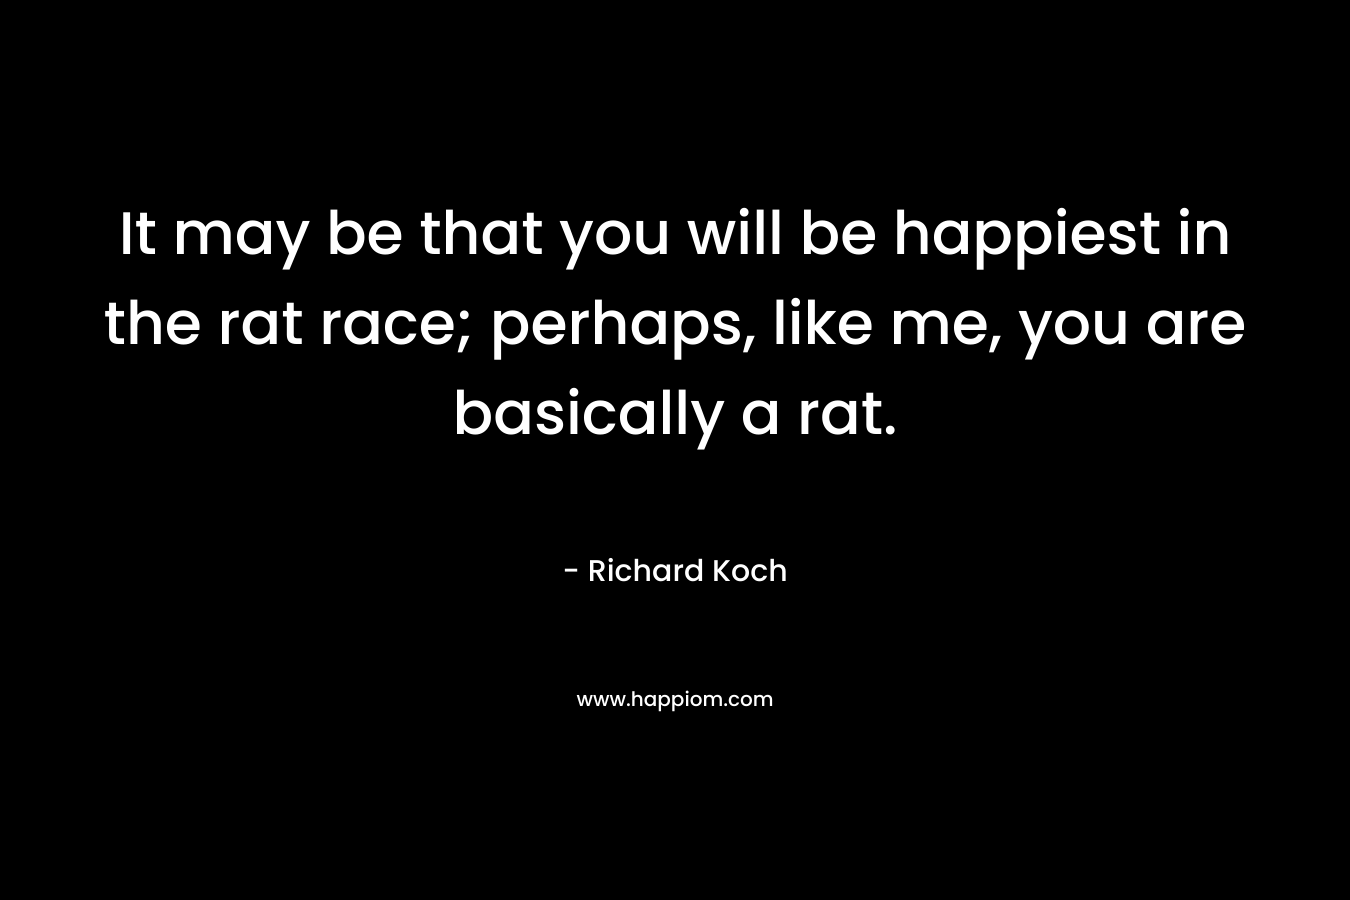 It may be that you will be happiest in the rat race; perhaps, like me, you are basically a rat. – Richard Koch